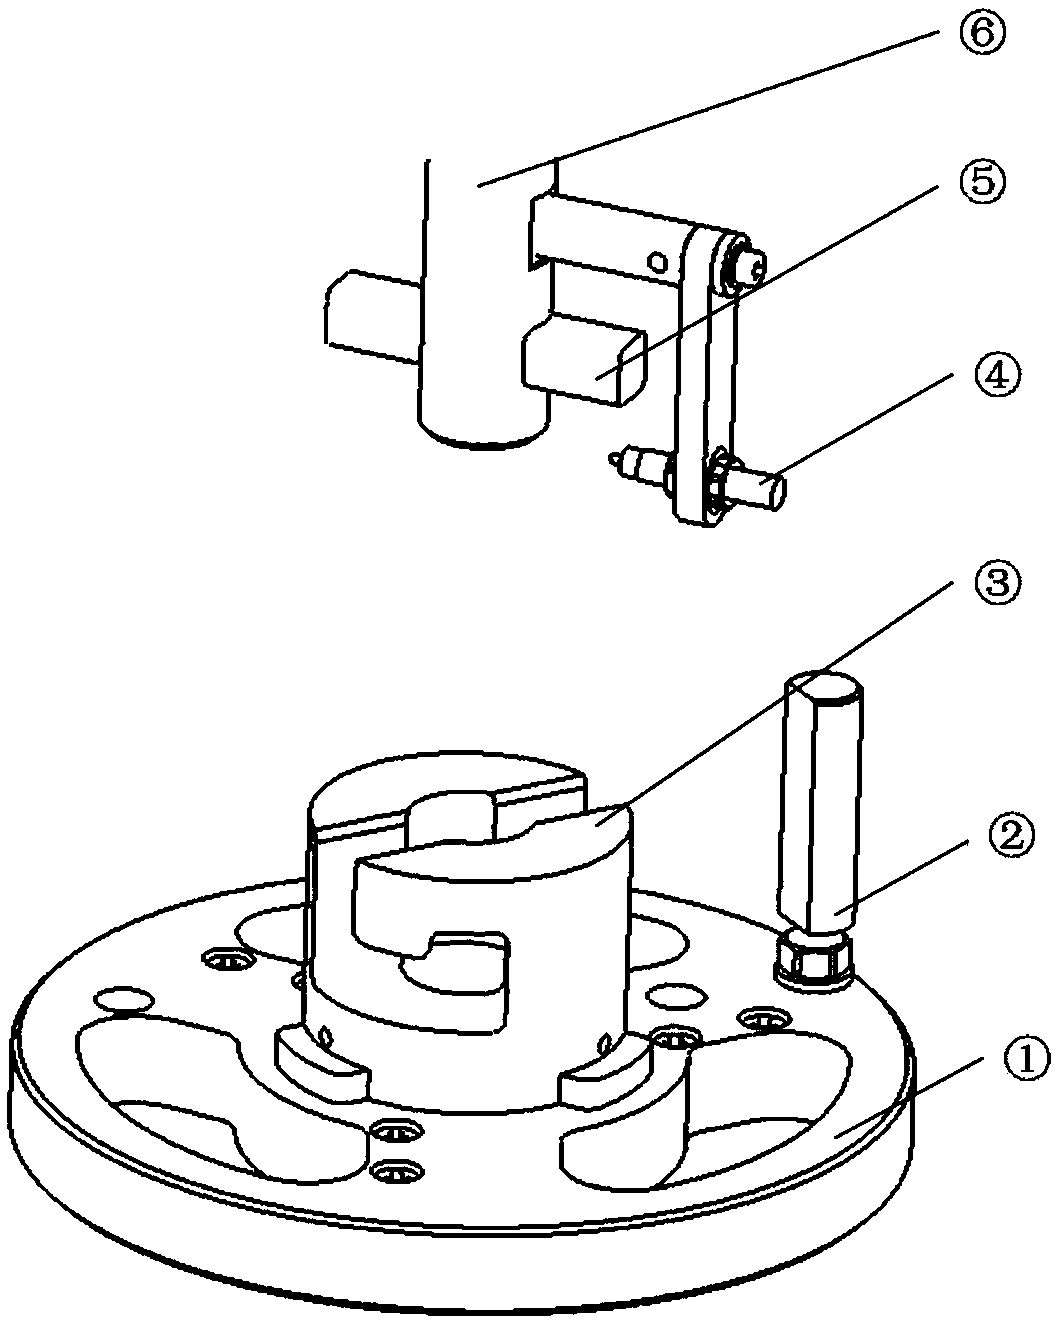 Device and method for unsealing a sealed packaging container